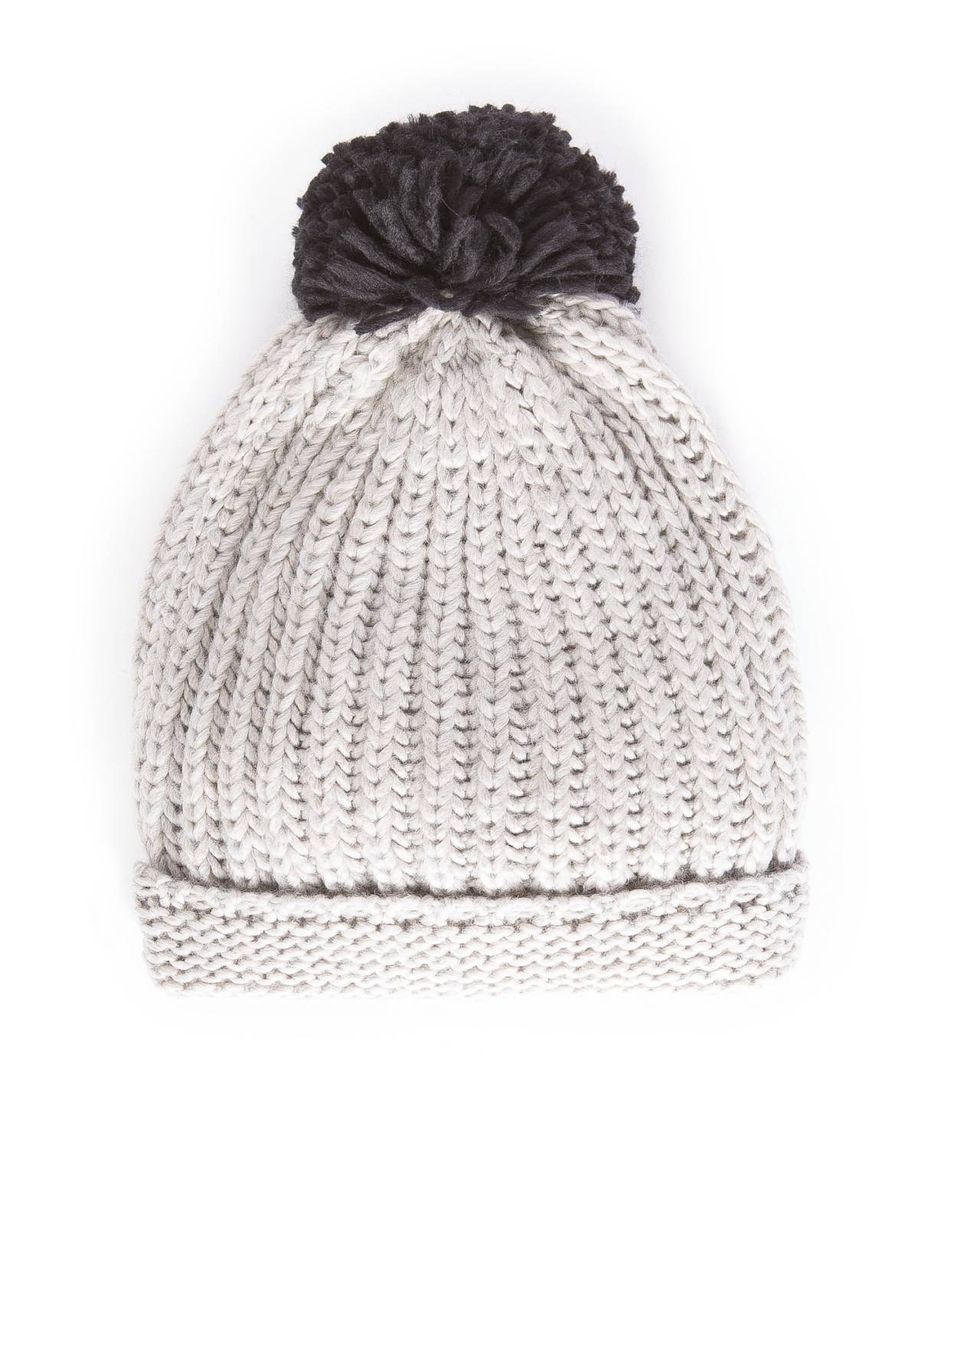 http://shop.mango.com/GB/p0/women/accessories/hats-and-caps/contrast-pompom-beanie/?id=33035649_P8&n=1&s=accesorios.gorros&ident=0__0_1414081953597&ts=1414081953597